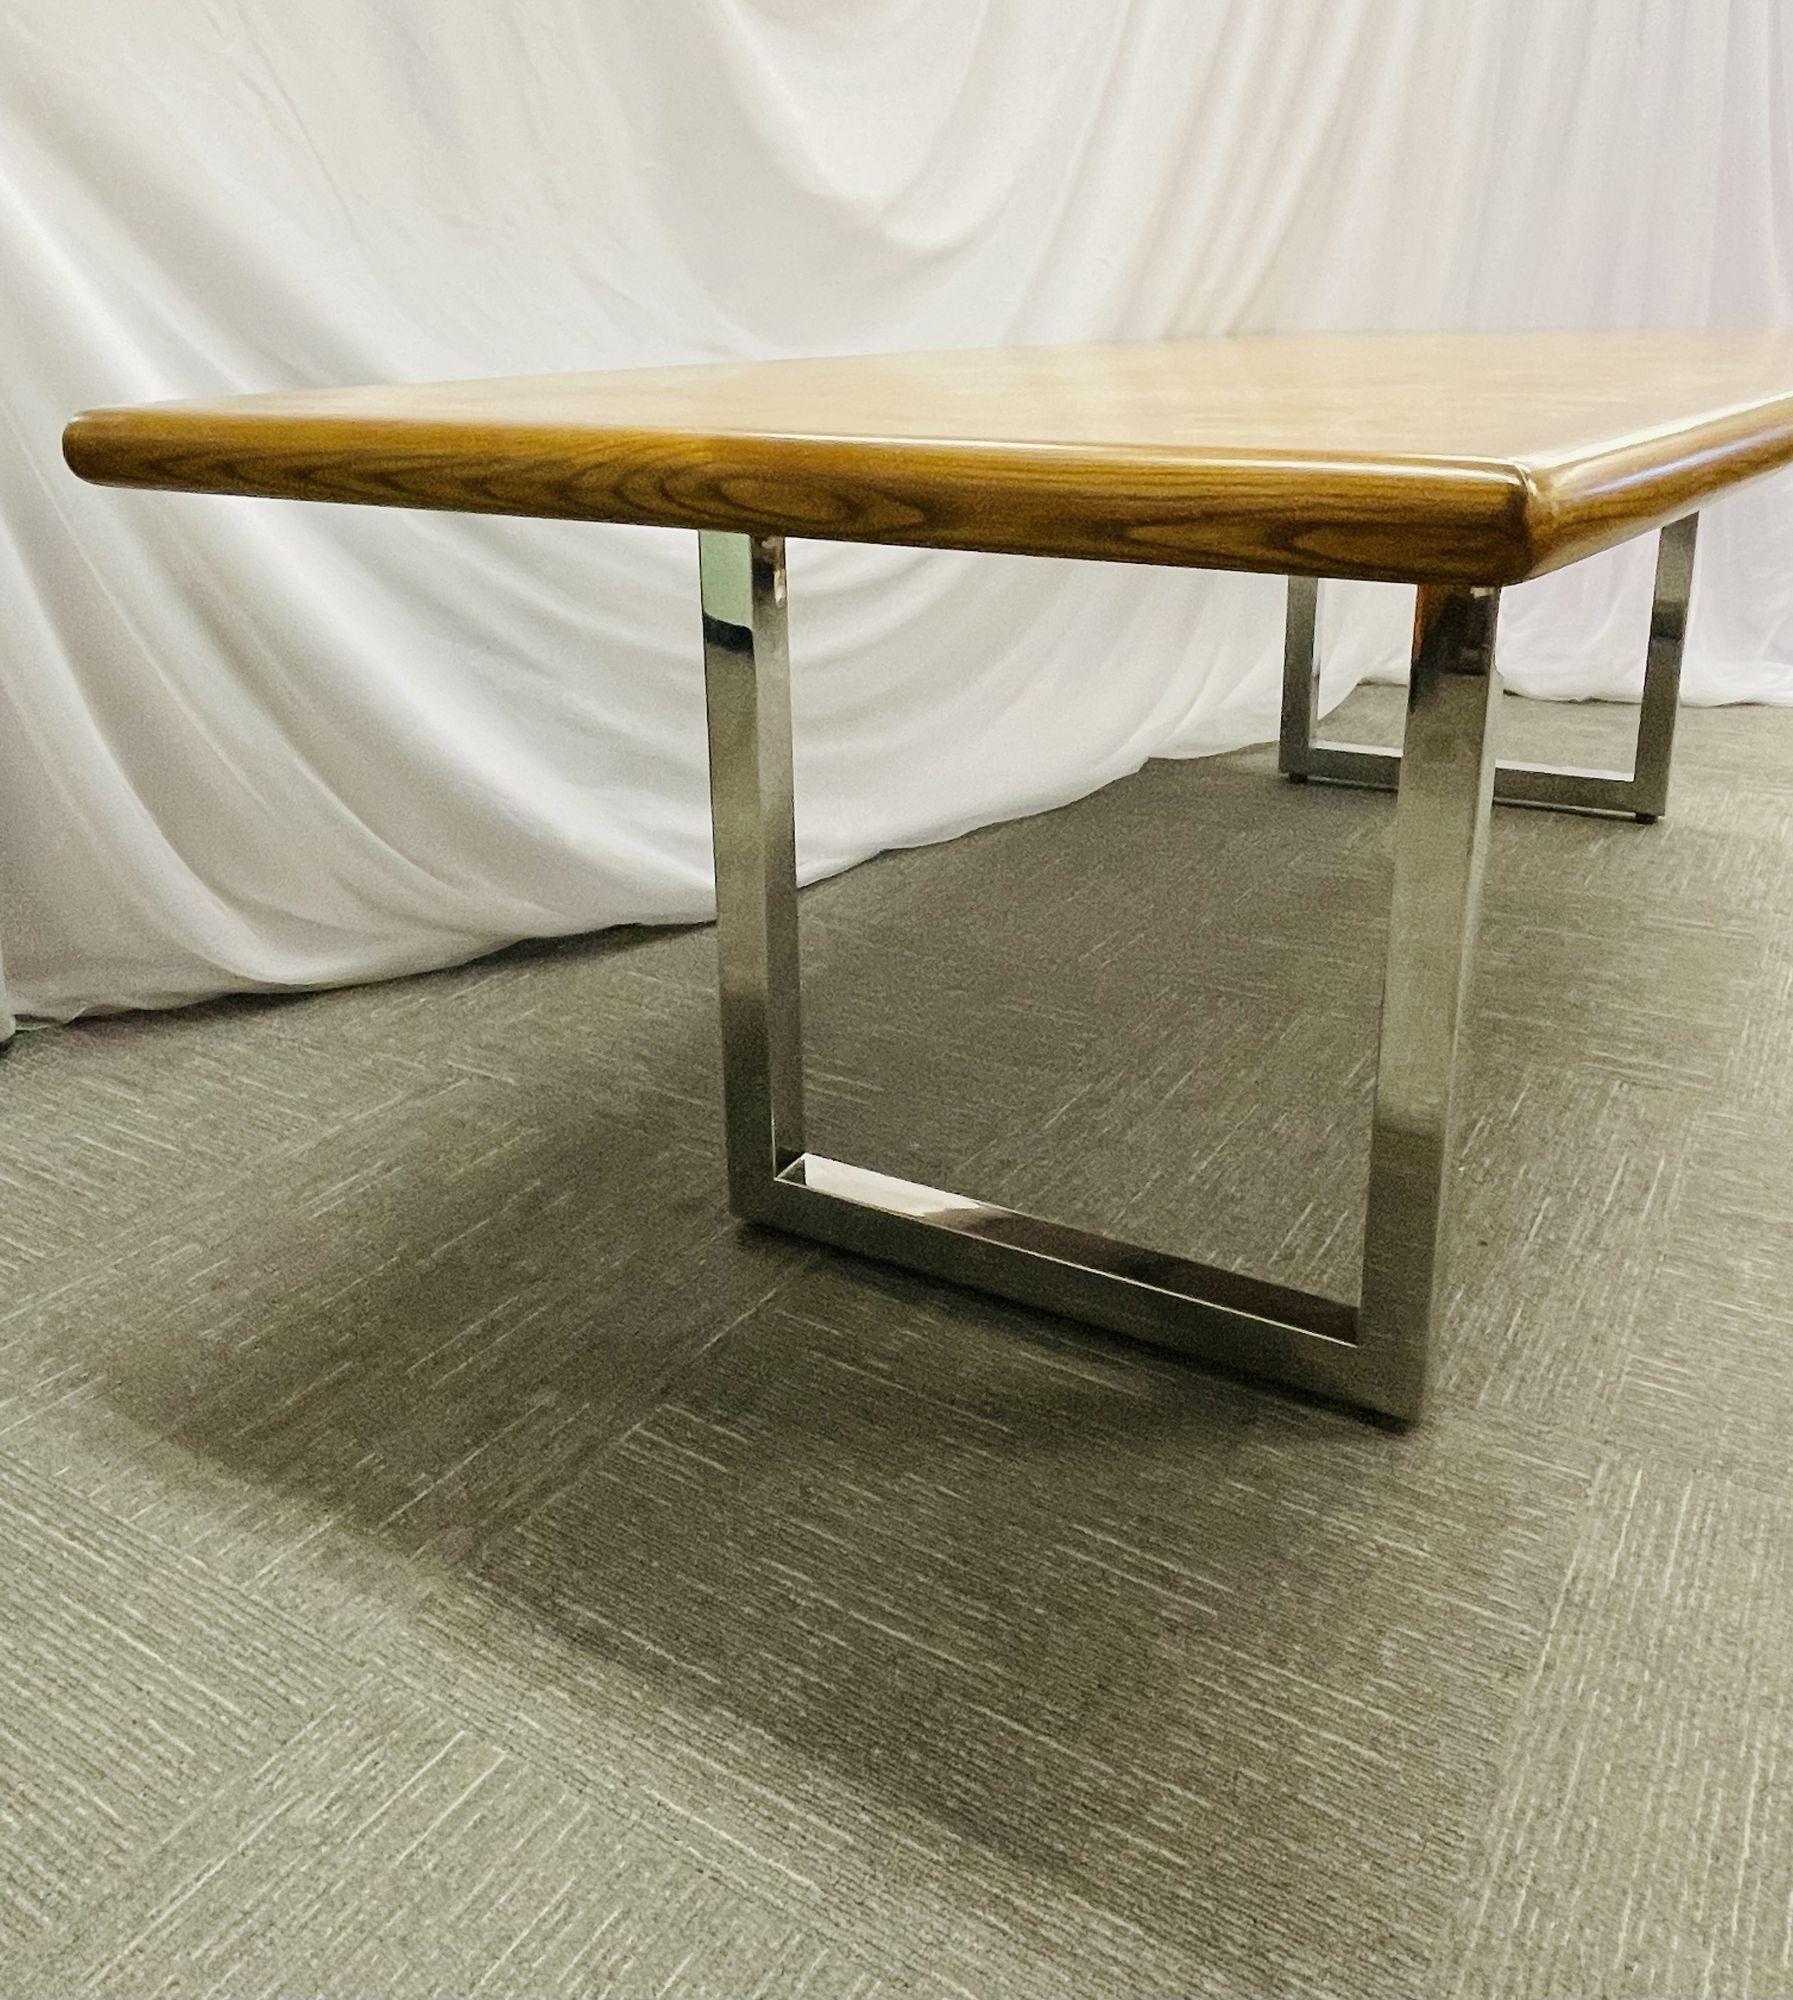 Mid-Century Modern Dining / Conference Table, Burl Wood, Chrome, American, 1960s For Sale 4